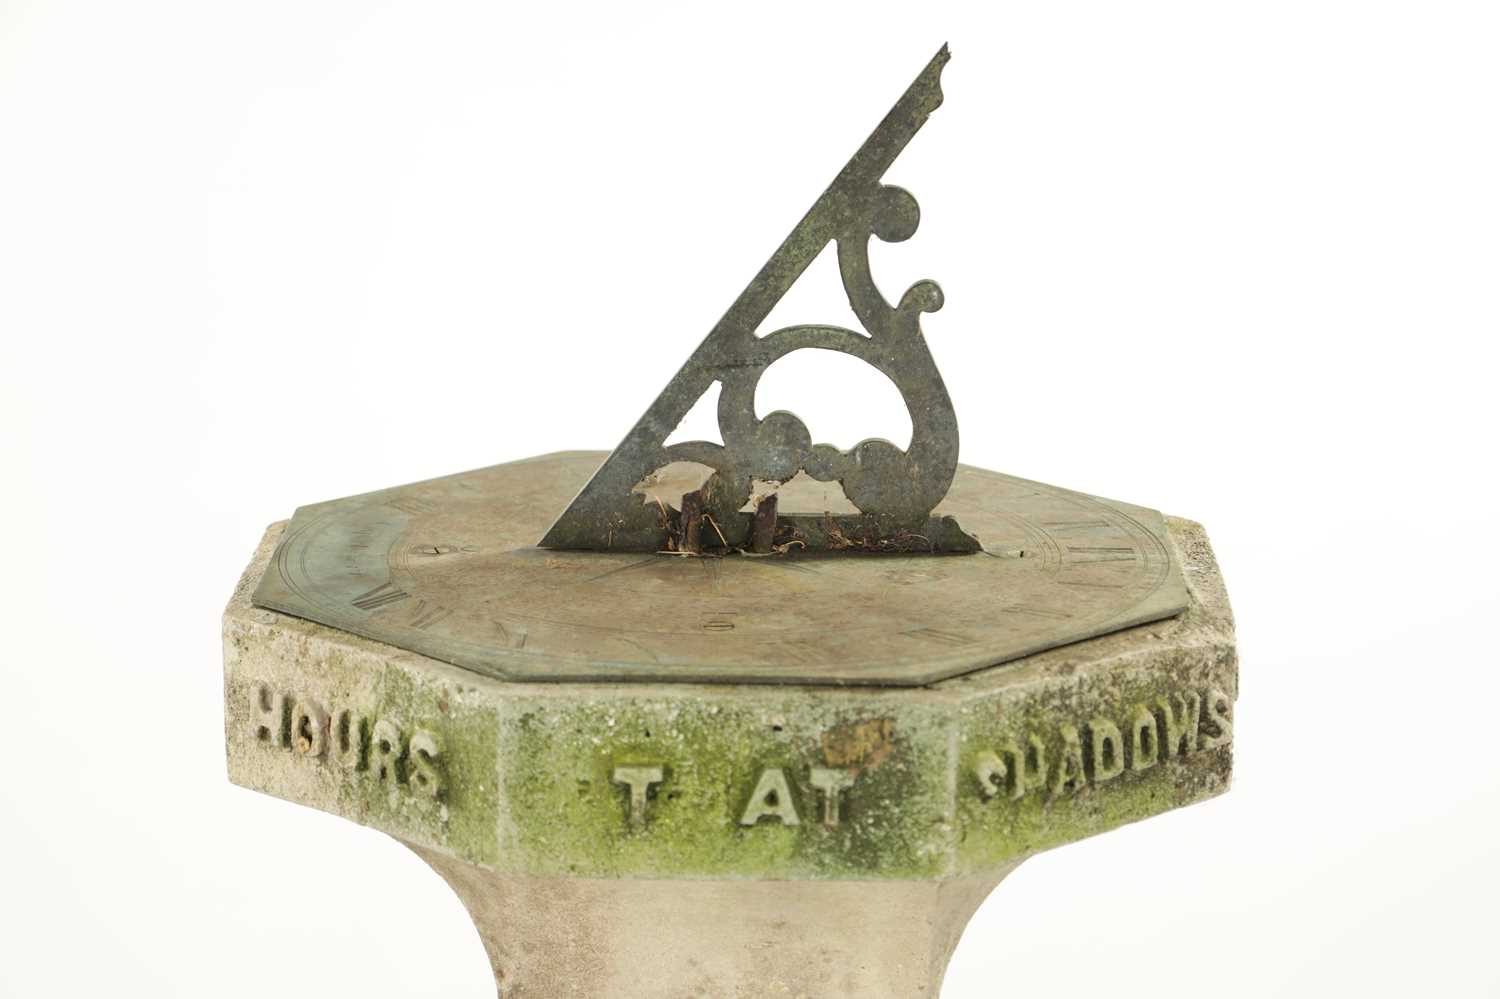 AN EARLY 18TH CENTURY BRONZE SUNDIAL DATED 1717 RAISED ON AN ARTS AND CRAFTS COMPOSITE STONE BASE - Image 4 of 17